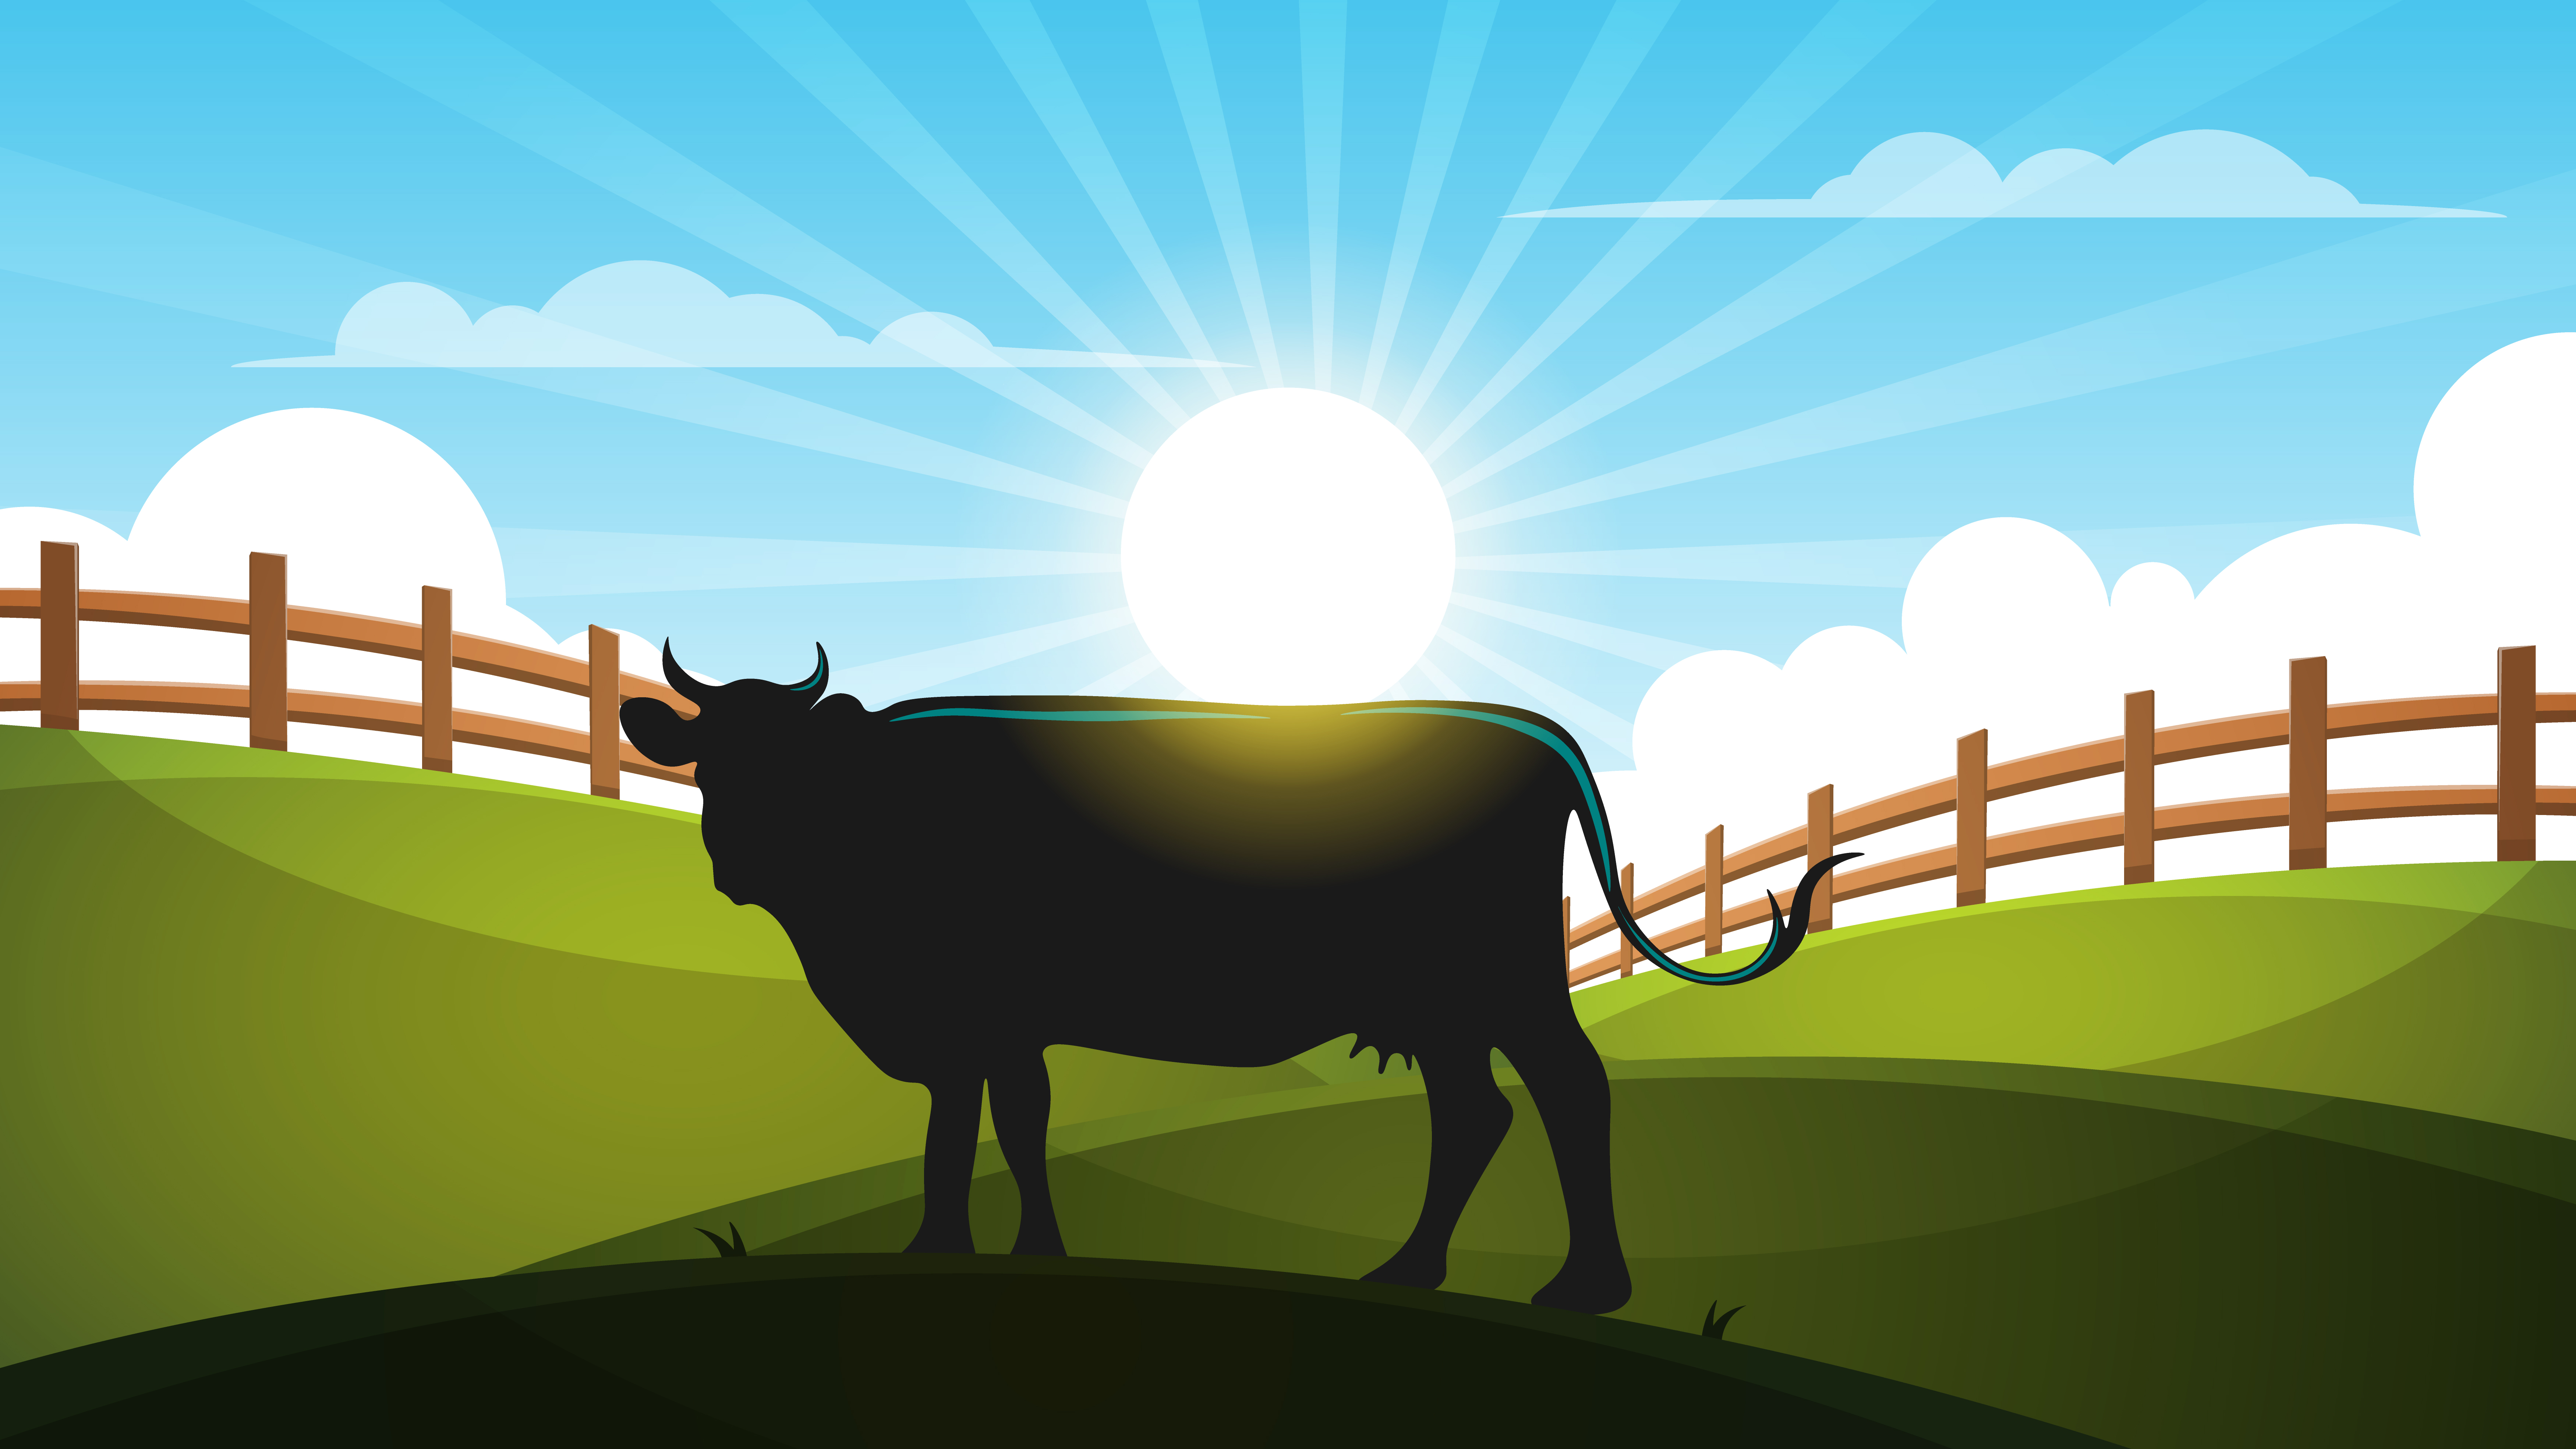 Cow in the meadow - cartoon landscape illustration. - Download Free